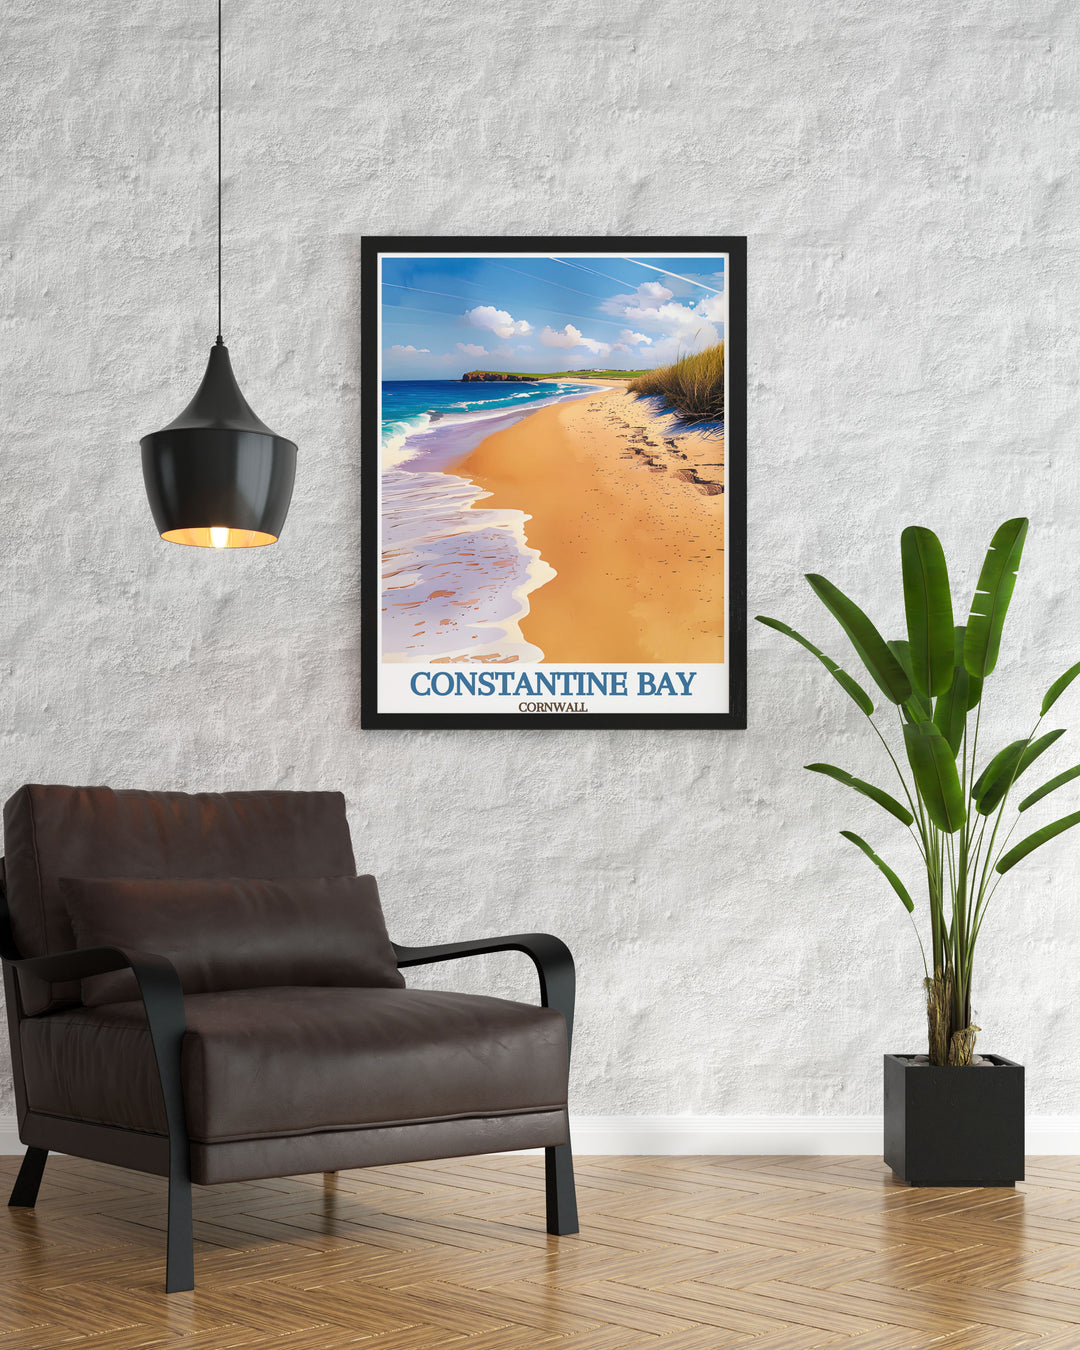 Explore the serene landscapes of Constantine Bay Beach, part of Cornwalls stunning coastline. The beach offers excellent surf conditions, beautiful golden sands, and a peaceful environment perfect for families, surfers, and nature lovers alike.